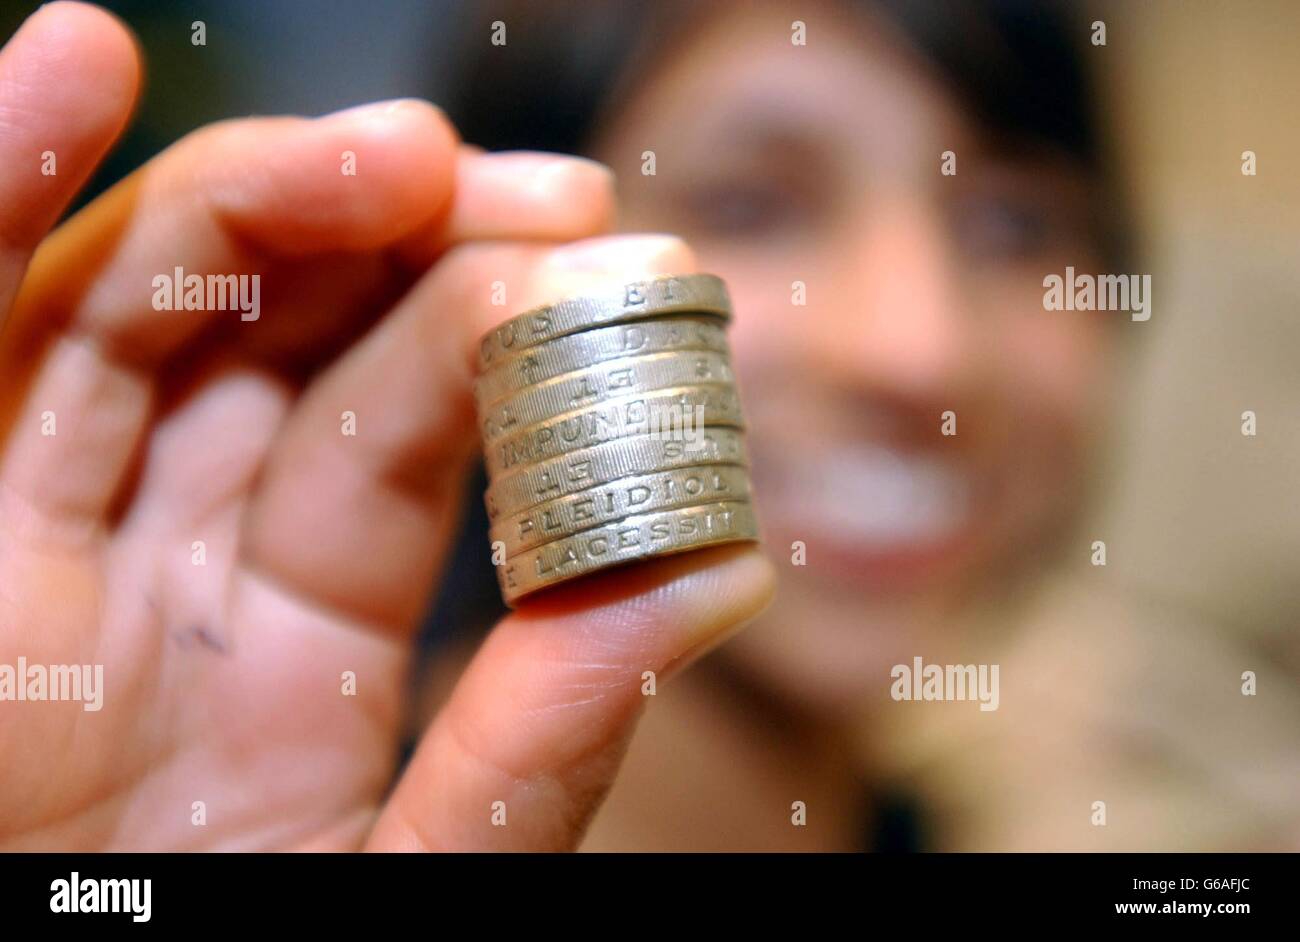 Stock picture of English One Pound Coins. *16/04/04: Four out of 10 Britons plan to increase their savings during the coming year, but past behaviour suggests only half will manage to set more cash aside, research showed. During the past 12 months just 26% of people said they had saved more, while 23% admitted they had actually saved less, according to investment manager JPMorgan Fleming. *25/08/04: People in the North are saving more than those in the South despite being on lower incomes, research showed. Northerners saved an average of 84 a month during the three months to the end of June, Stock Photo